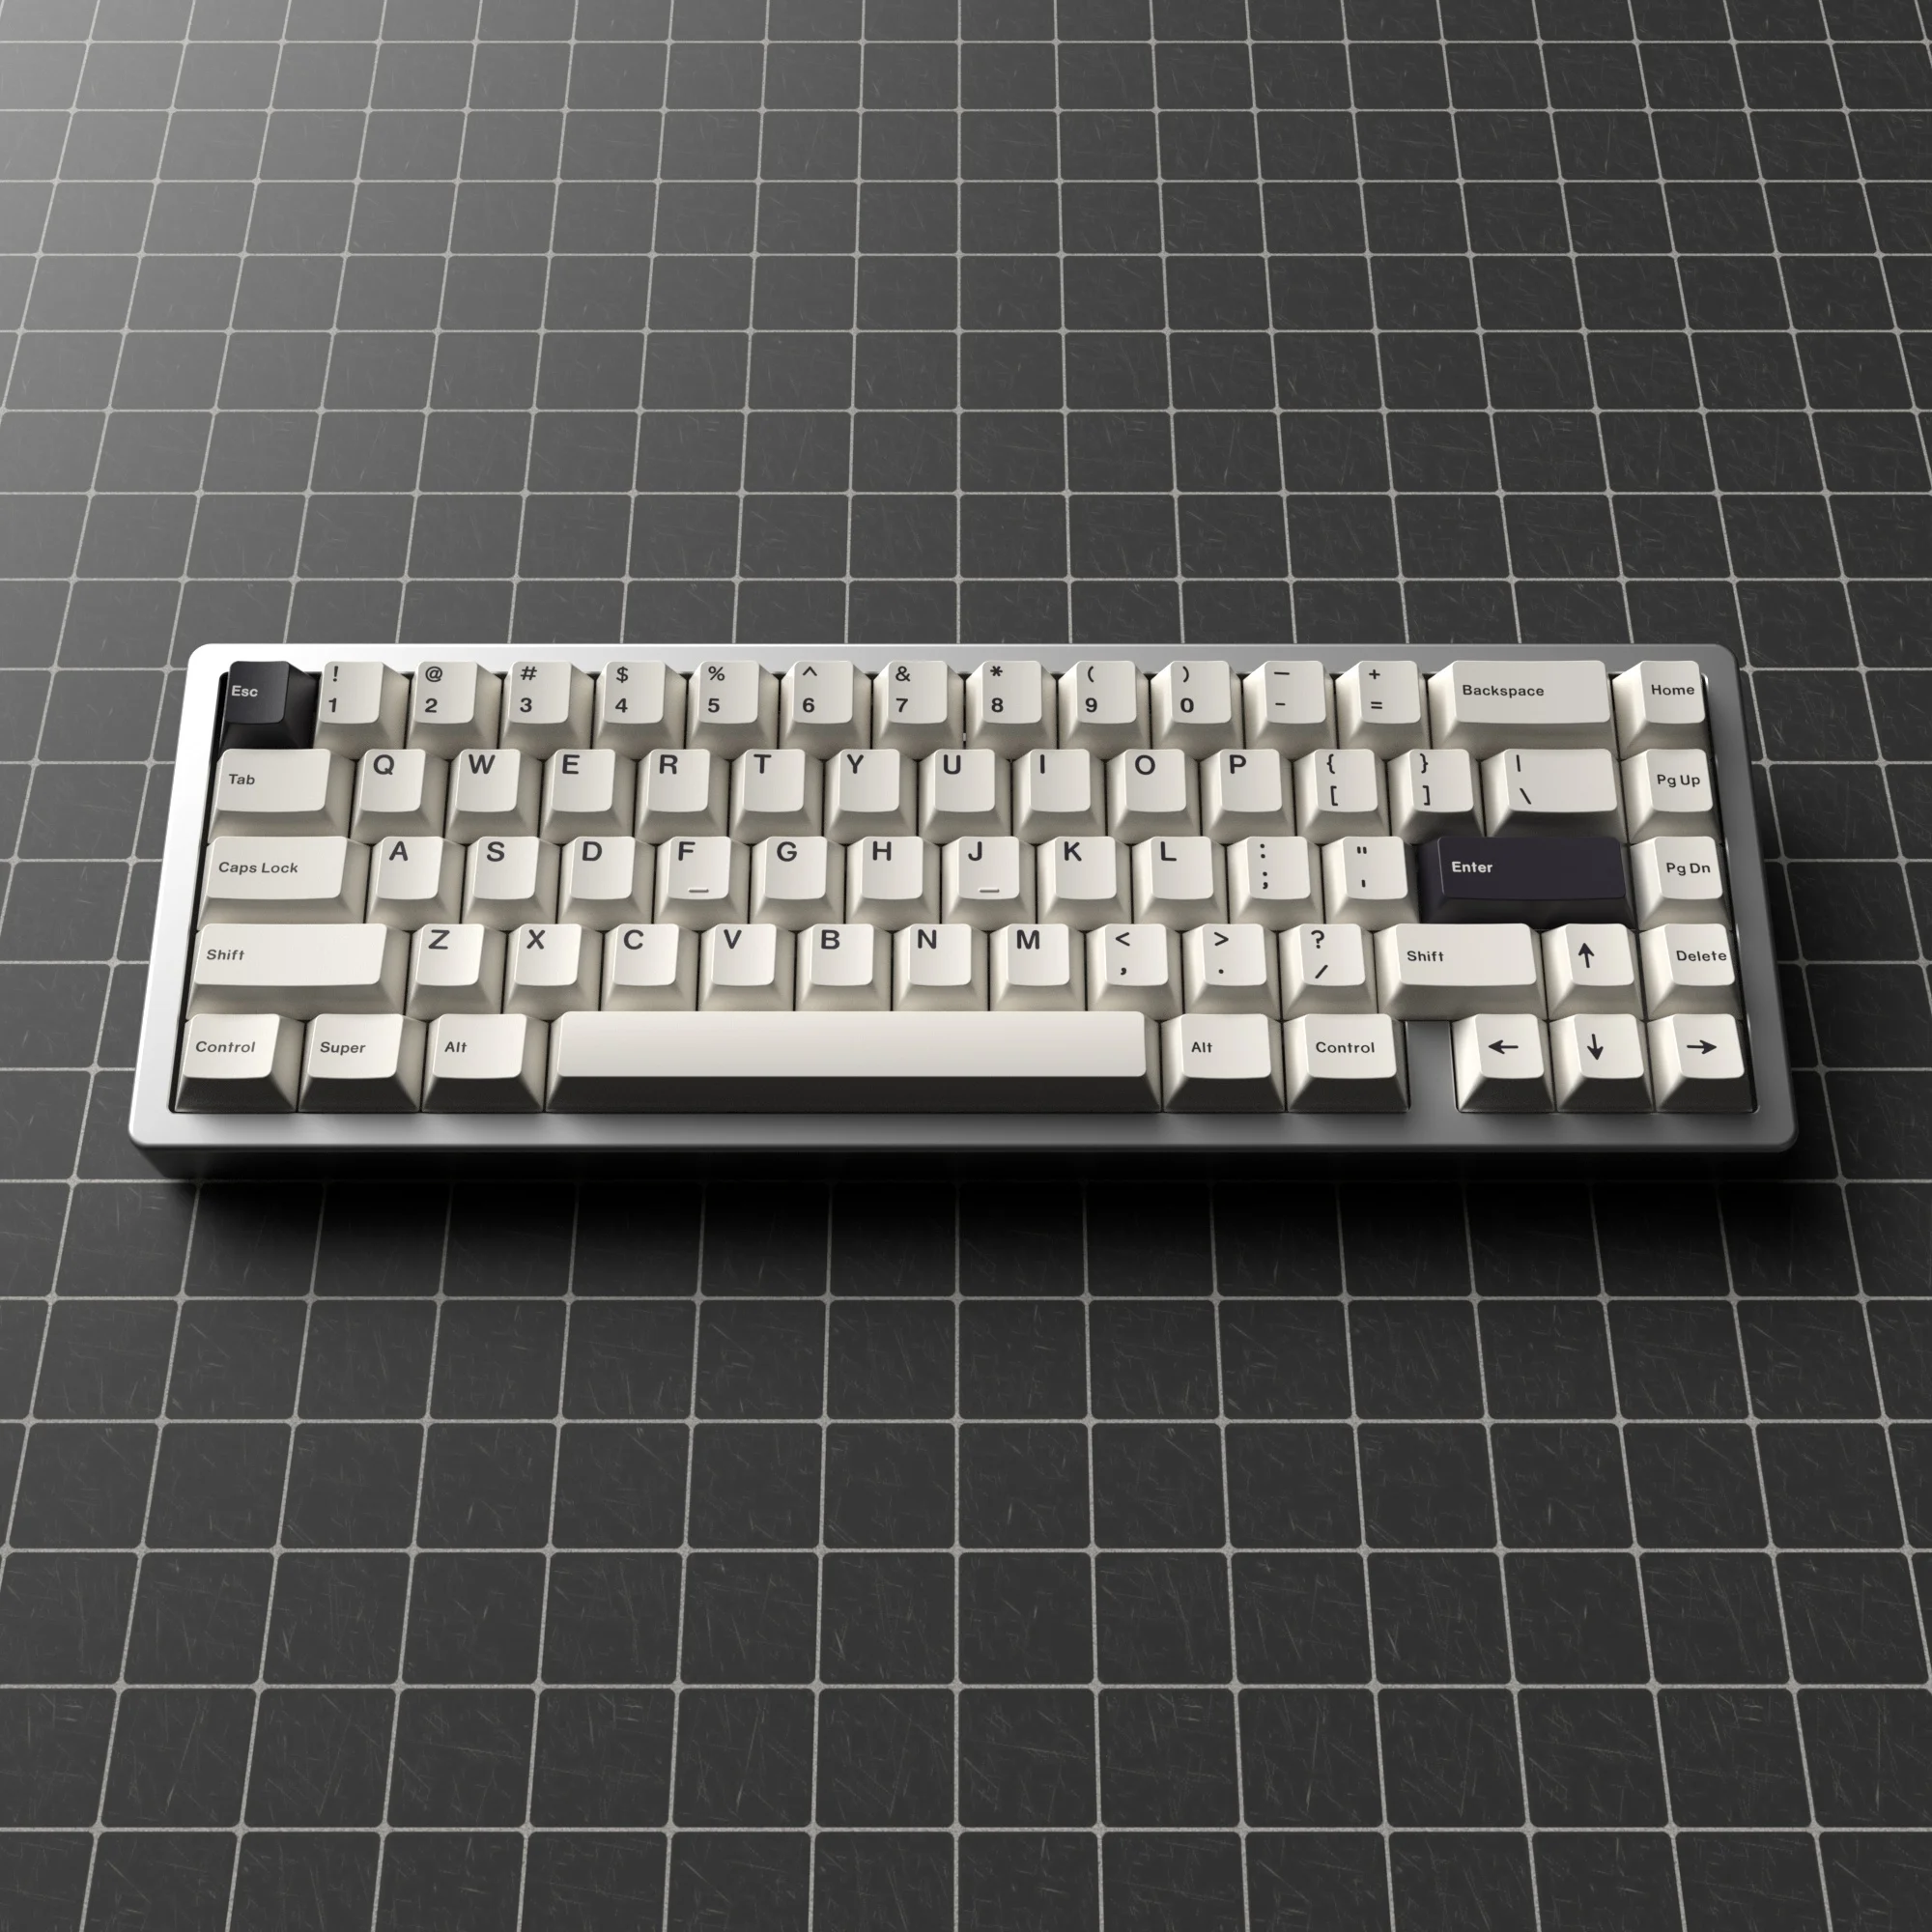 

131 Keys Black And White BOW Keycap Cherry Profile PBT Dye Subbed Key Caps For MX Switch Fit 61/64/68/87/96/104/108 Keyboard